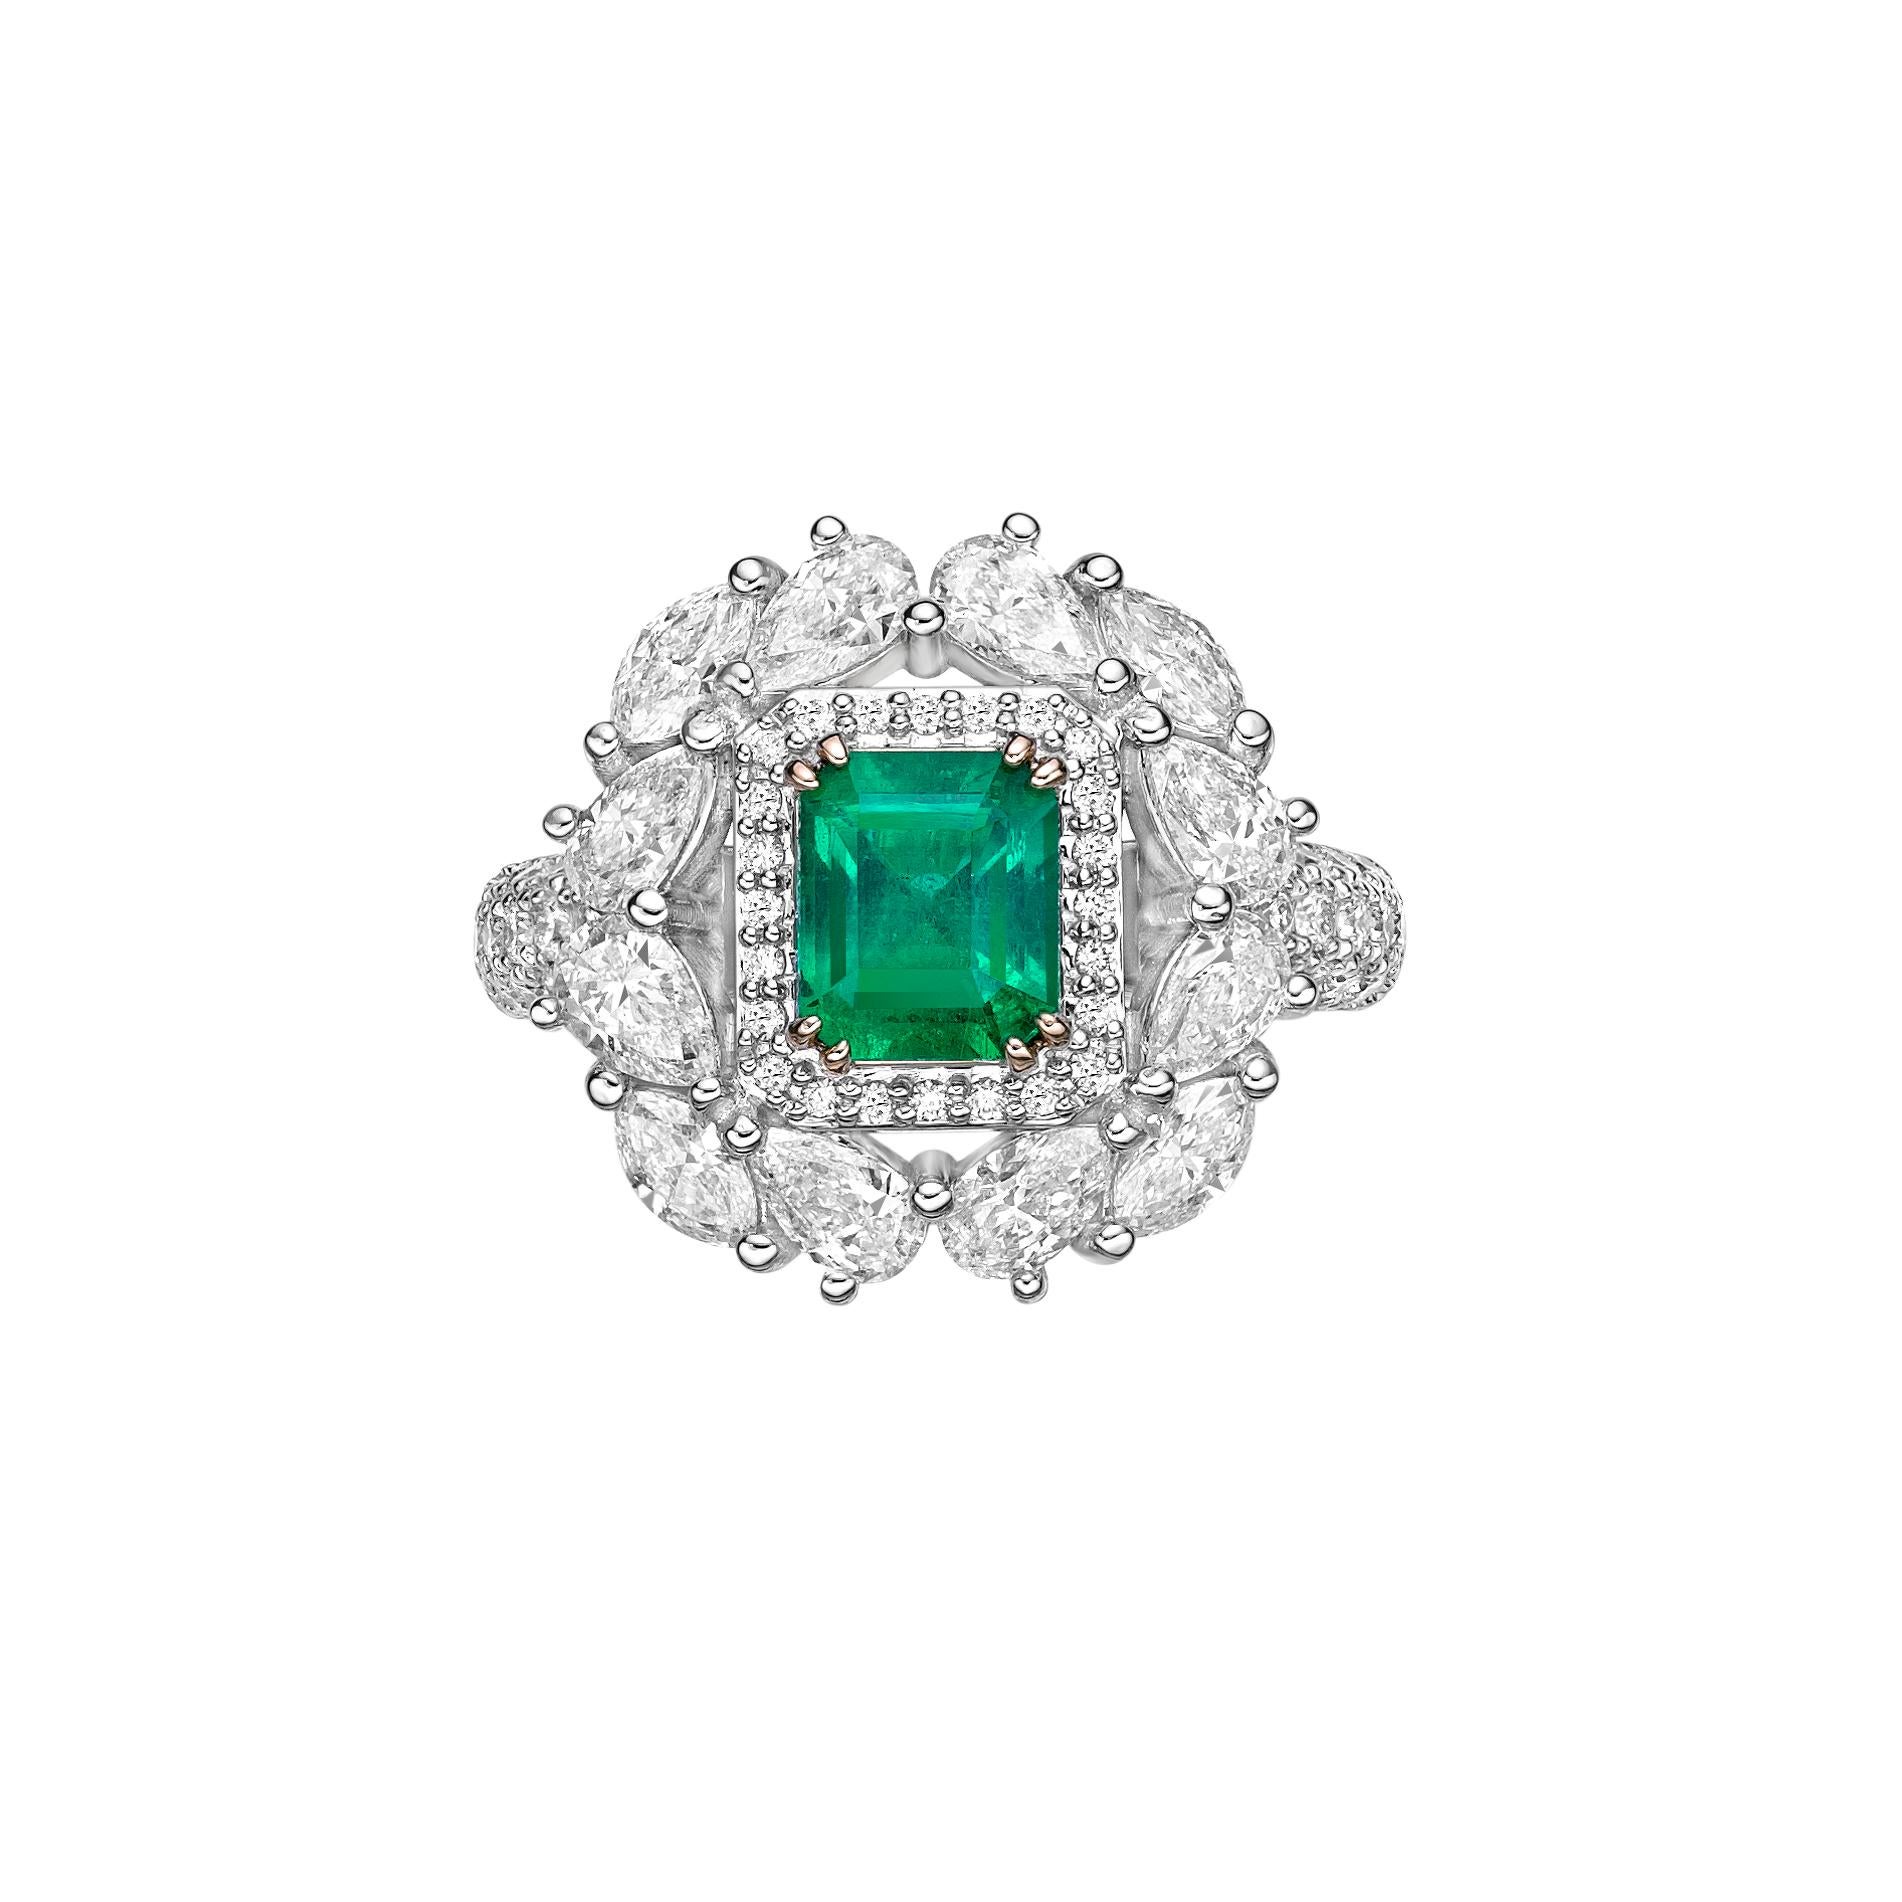 Contemporary 1.13 Carat Sunflower Emerald Bridal Ring in 18KWYG with White Diamond. For Sale